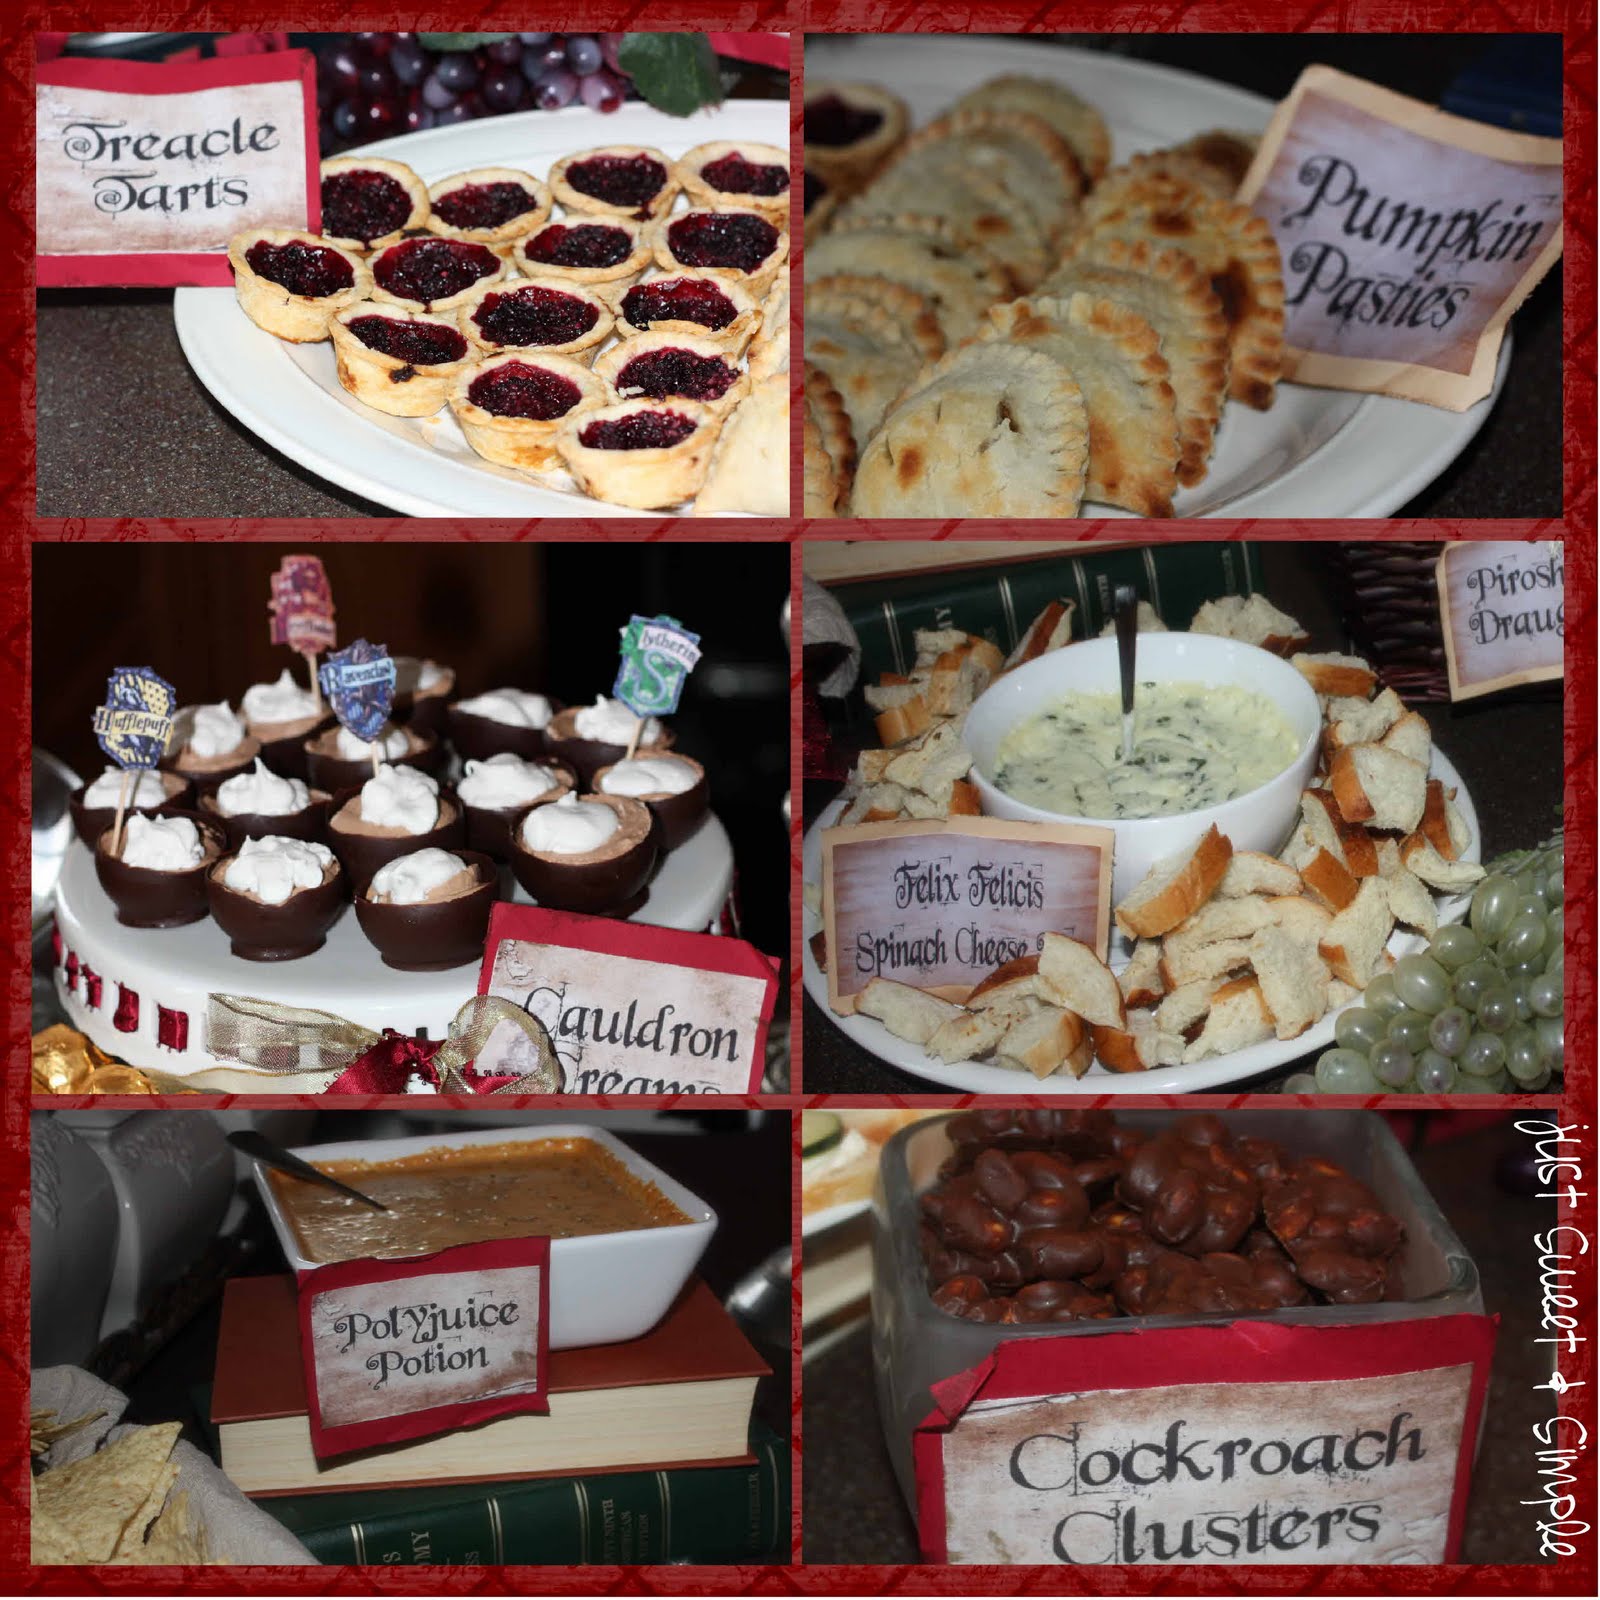 Harry Potter Party Food Ideas - BEYOND THE NOMS